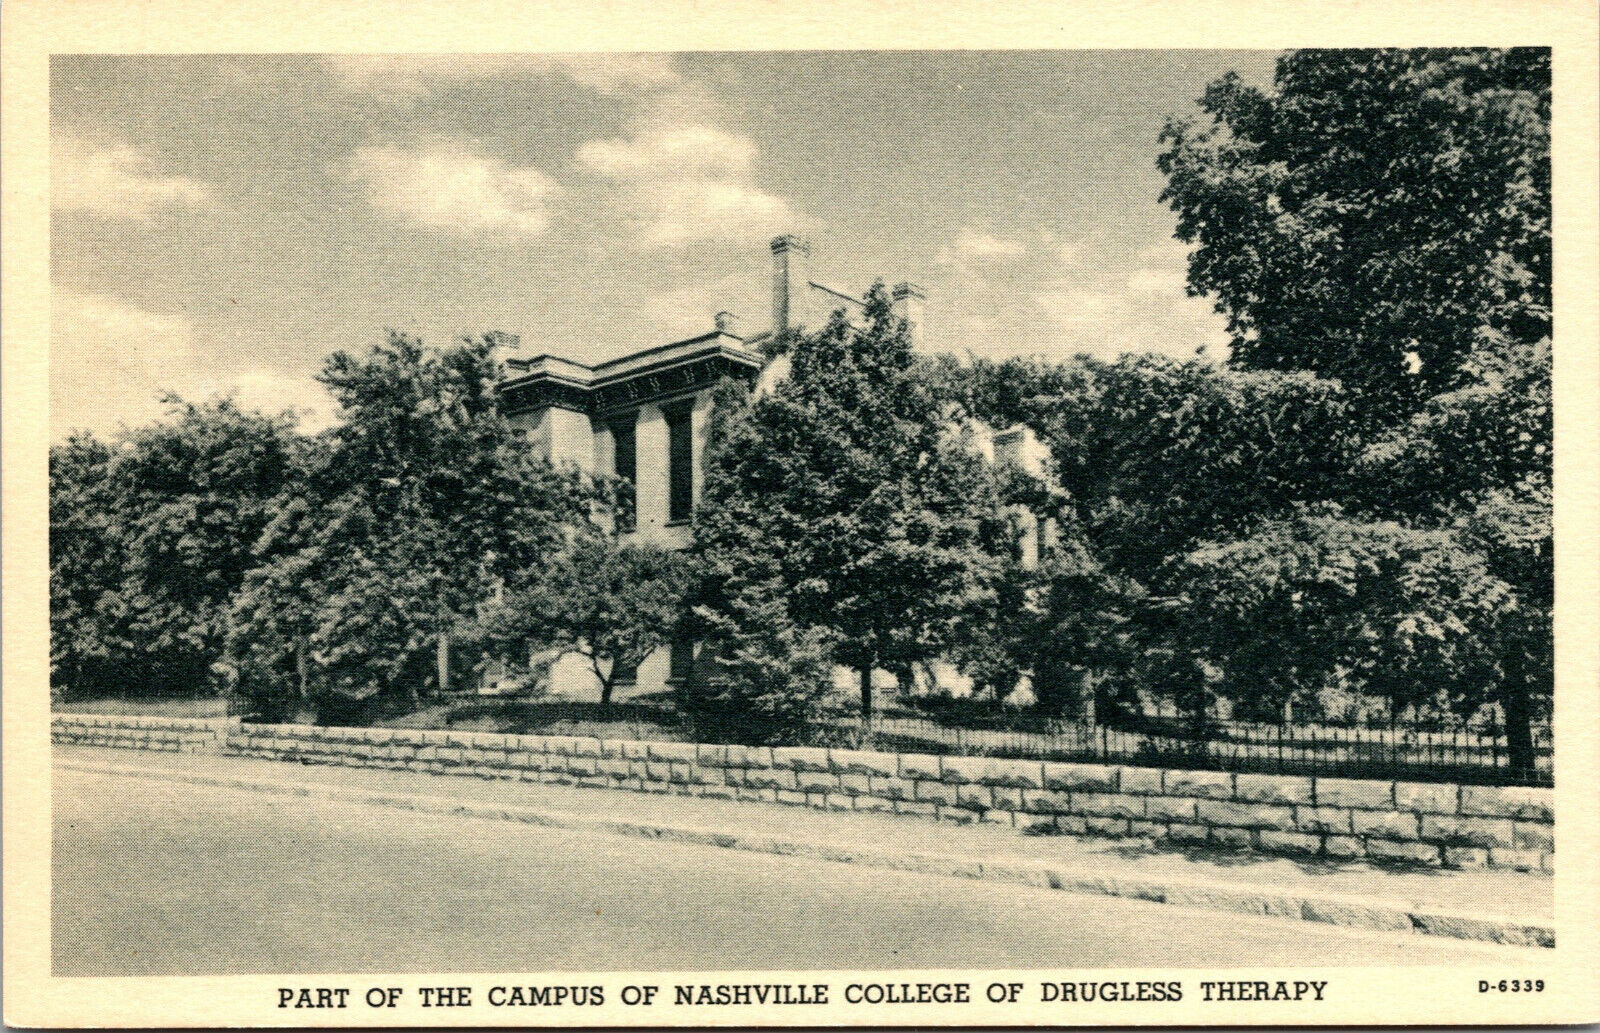 Vtg 1940s Nashville College of Drugless Therapy Campus Tennessee TN Postcard